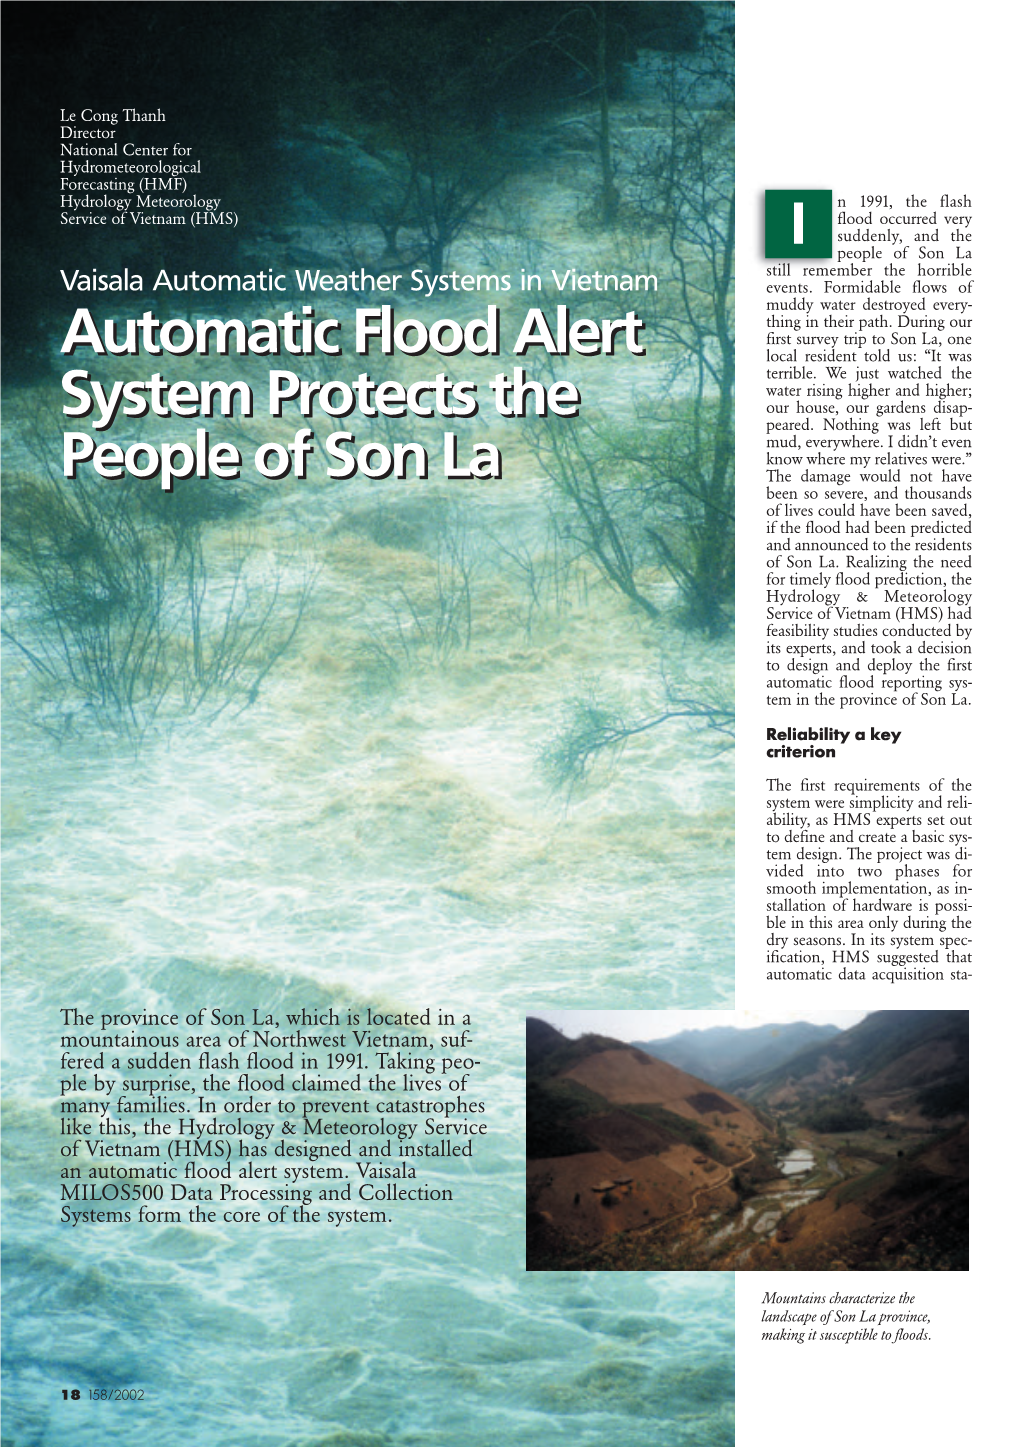 Automatic Flood Alert System Protects the People of Son La Automatic